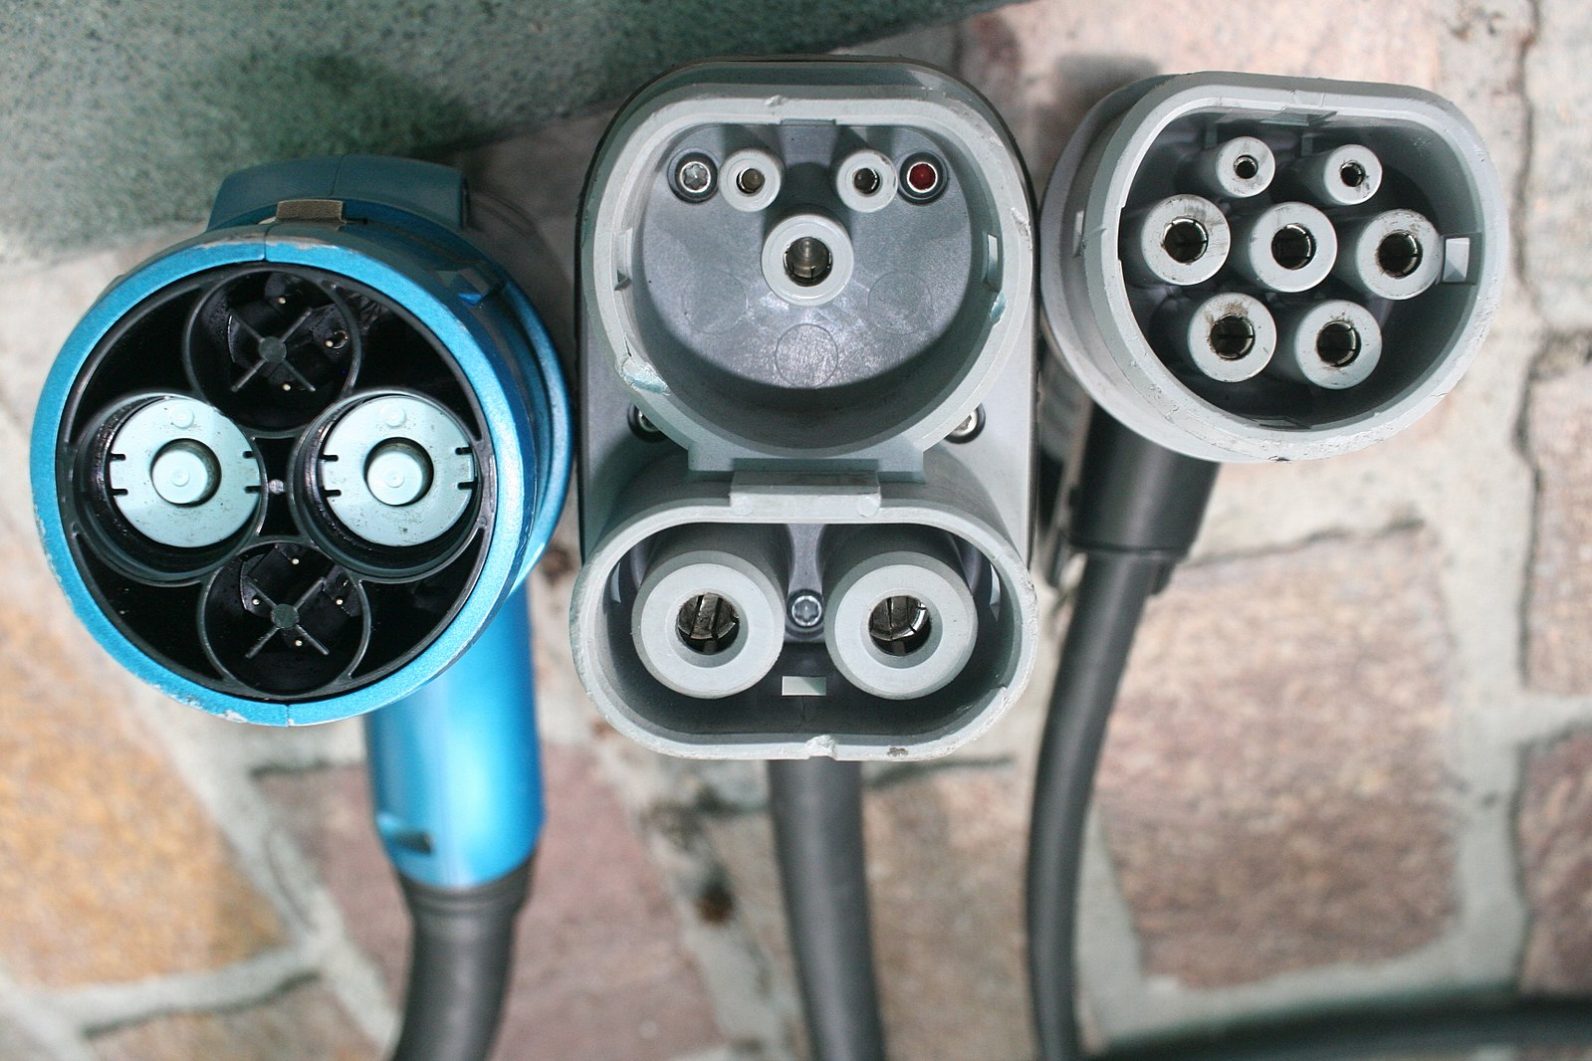 1599px-Chademo-combo2-iec-type-2-connectors-side-by-side-1592x1061.jpg